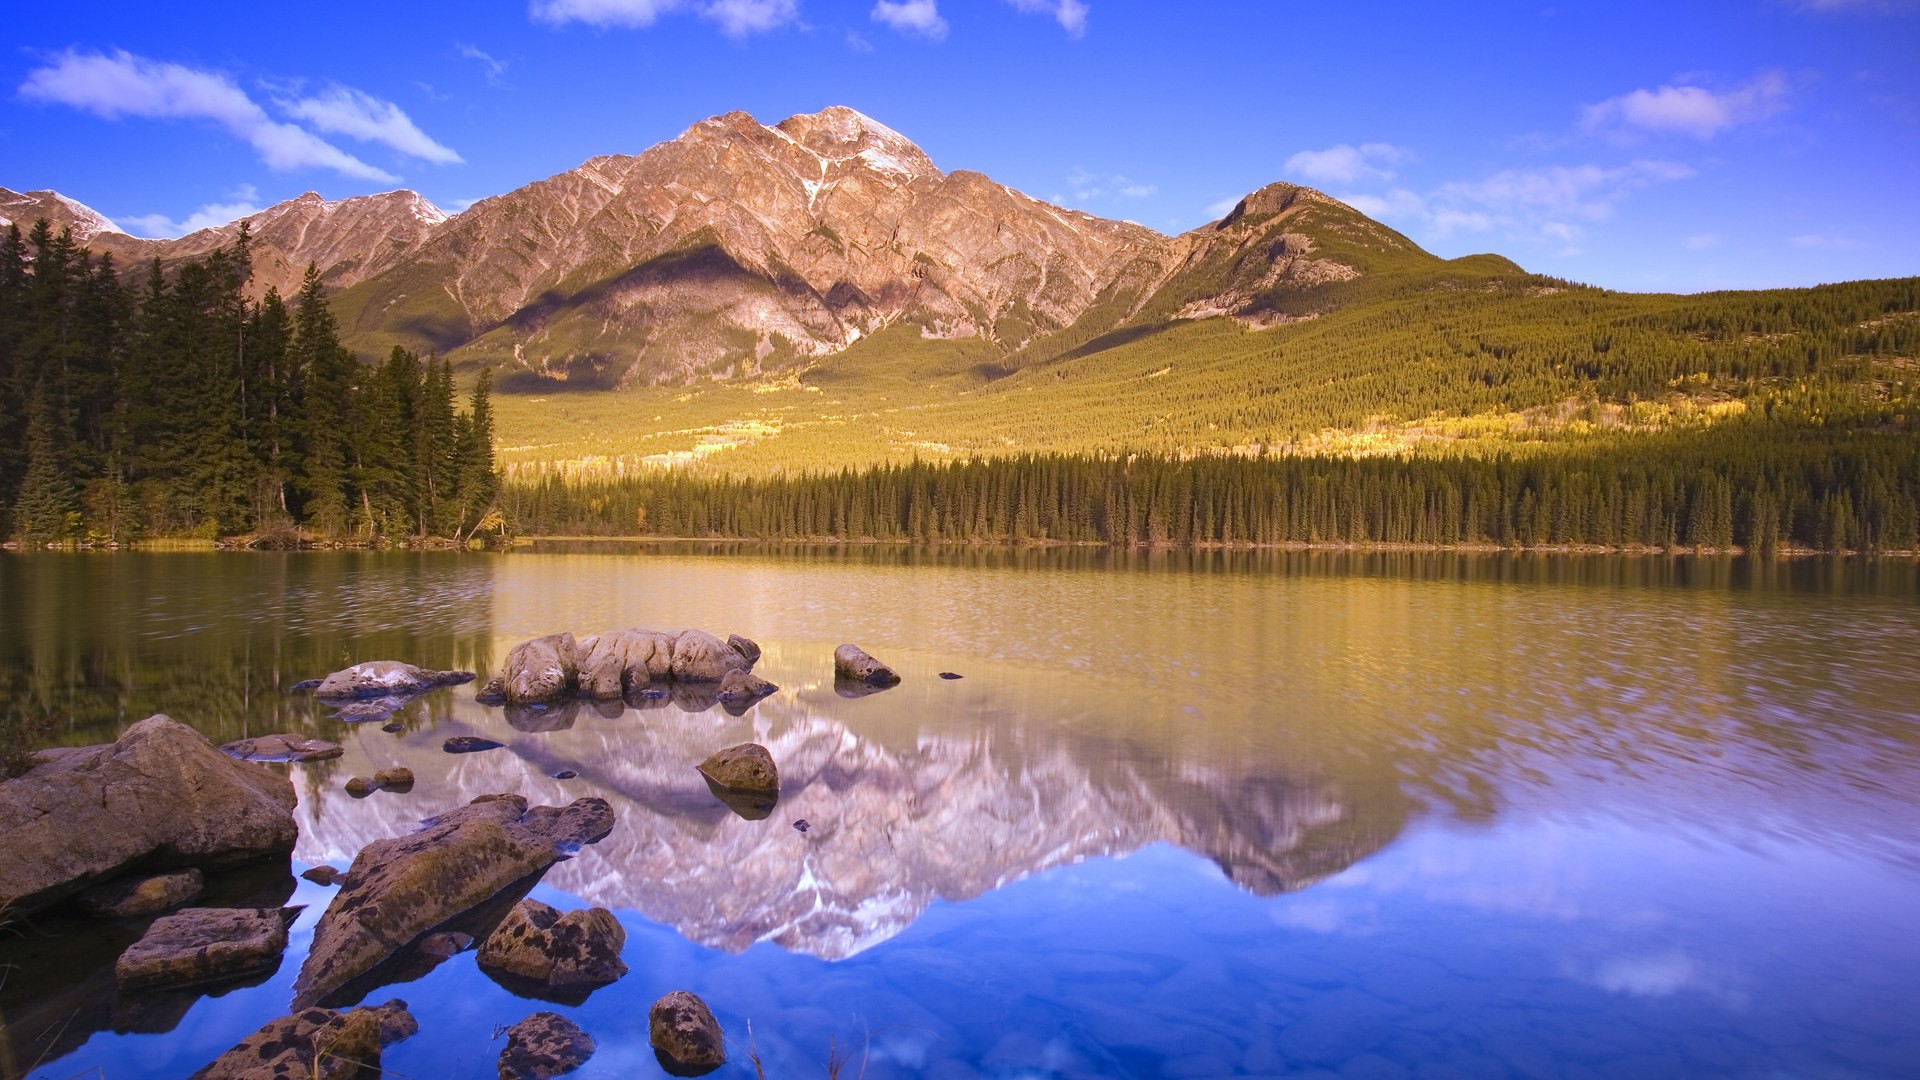 General 1920x1080 trees landscape lake mountains forest nature calm waters reflection outdoors